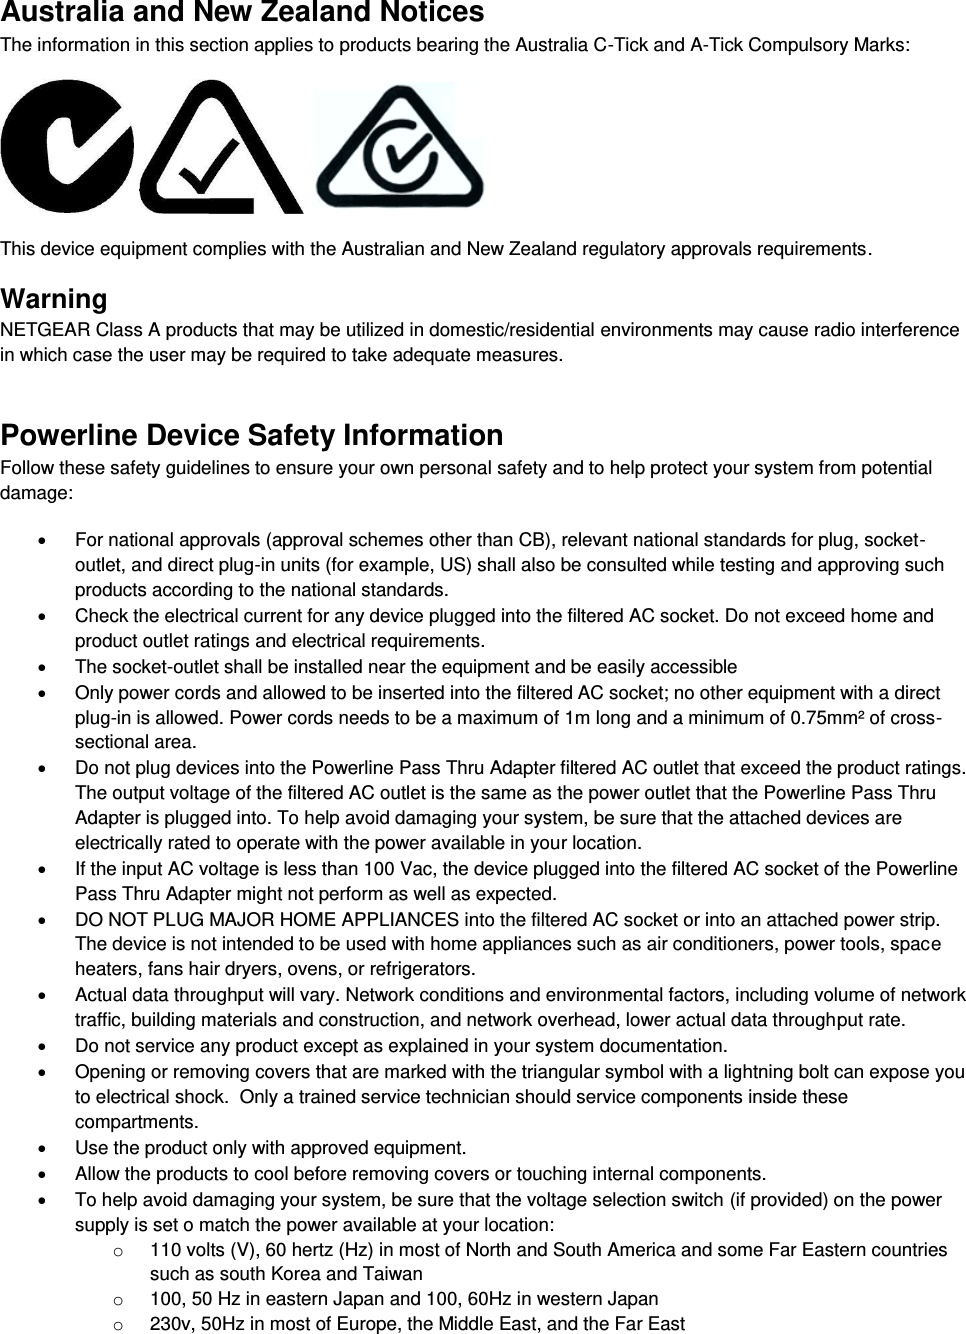  Australia and New Zealand Notices The information in this section applies to products bearing the Australia C-Tick and A-Tick Compulsory Marks:      This device equipment complies with the Australian and New Zealand regulatory approvals requirements. Warning NETGEAR Class A products that may be utilized in domestic/residential environments may cause radio interference in which case the user may be required to take adequate measures.  Powerline Device Safety Information Follow these safety guidelines to ensure your own personal safety and to help protect your system from potential damage:   For national approvals (approval schemes other than CB), relevant national standards for plug, socket-outlet, and direct plug-in units (for example, US) shall also be consulted while testing and approving such products according to the national standards.    Check the electrical current for any device plugged into the filtered AC socket. Do not exceed home and product outlet ratings and electrical requirements.   The socket-outlet shall be installed near the equipment and be easily accessible   Only power cords and allowed to be inserted into the filtered AC socket; no other equipment with a direct plug-in is allowed. Power cords needs to be a maximum of 1m long and a minimum of 0.75mm² of cross-sectional area.   Do not plug devices into the Powerline Pass Thru Adapter filtered AC outlet that exceed the product ratings.  The output voltage of the filtered AC outlet is the same as the power outlet that the Powerline Pass Thru Adapter is plugged into. To help avoid damaging your system, be sure that the attached devices are electrically rated to operate with the power available in your location.   If the input AC voltage is less than 100 Vac, the device plugged into the filtered AC socket of the Powerline Pass Thru Adapter might not perform as well as expected.   DO NOT PLUG MAJOR HOME APPLIANCES into the filtered AC socket or into an attached power strip.  The device is not intended to be used with home appliances such as air conditioners, power tools, space heaters, fans hair dryers, ovens, or refrigerators.    Actual data throughput will vary. Network conditions and environmental factors, including volume of network traffic, building materials and construction, and network overhead, lower actual data throughput rate.    Do not service any product except as explained in your system documentation.    Opening or removing covers that are marked with the triangular symbol with a lightning bolt can expose you to electrical shock.  Only a trained service technician should service components inside these compartments.   Use the product only with approved equipment.   Allow the products to cool before removing covers or touching internal components.   To help avoid damaging your system, be sure that the voltage selection switch (if provided) on the power supply is set o match the power available at your location: o  110 volts (V), 60 hertz (Hz) in most of North and South America and some Far Eastern countries such as south Korea and Taiwan o  100, 50 Hz in eastern Japan and 100, 60Hz in western Japan o  230v, 50Hz in most of Europe, the Middle East, and the Far East 